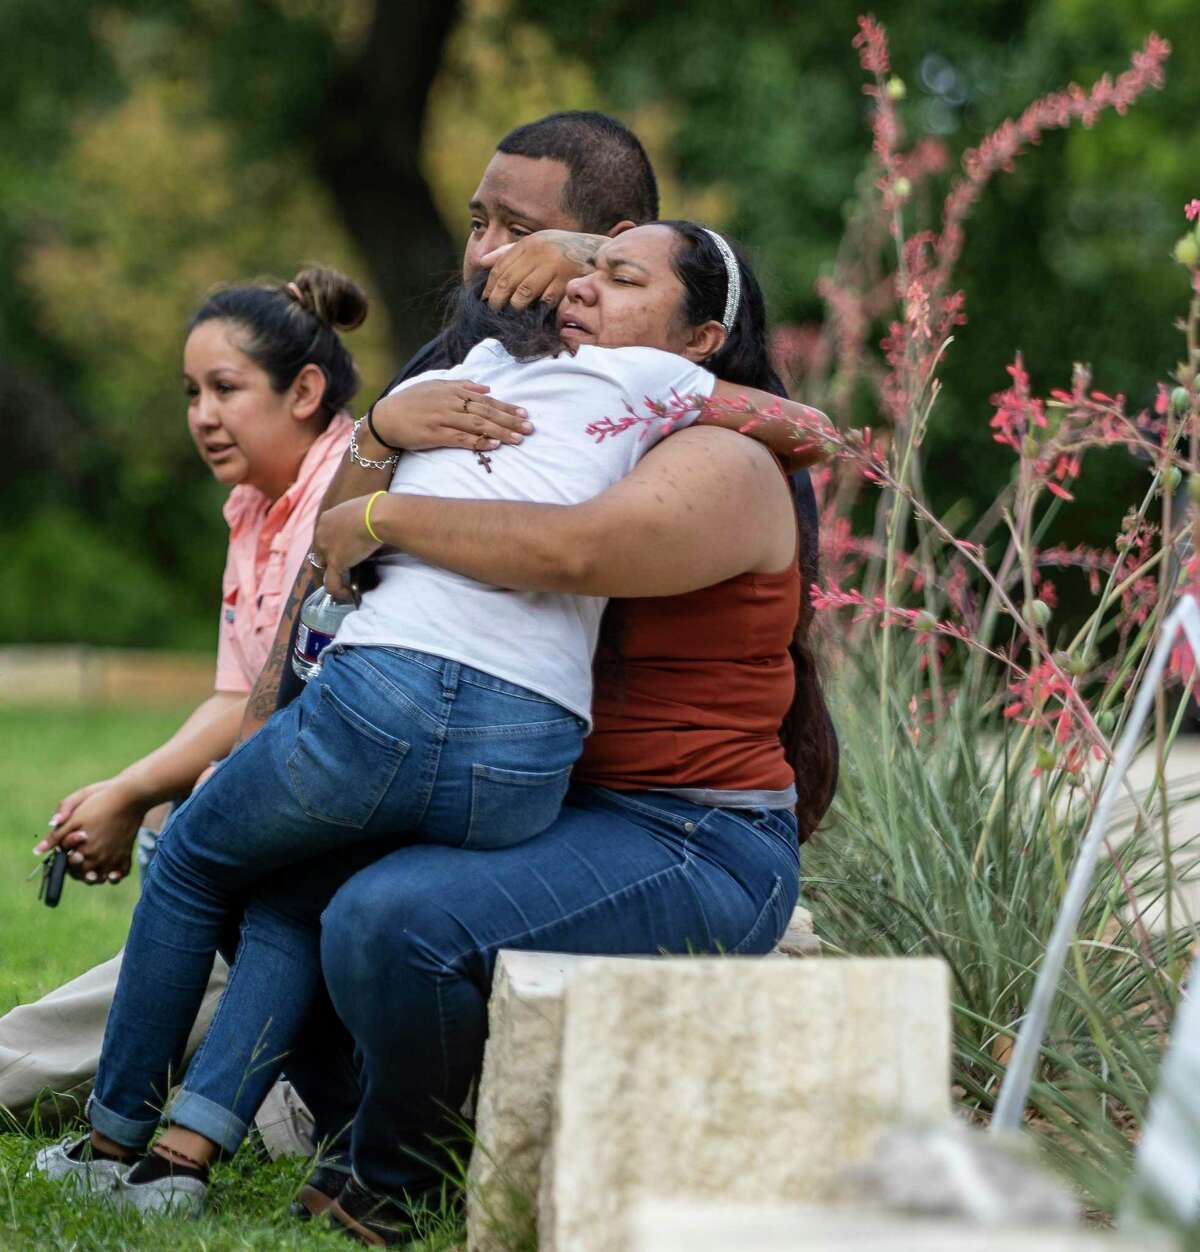 A woman consoles a child in Uvalde on Tuesday. We are living our worst nightmares, but as parents we can guide our children through this painful time.